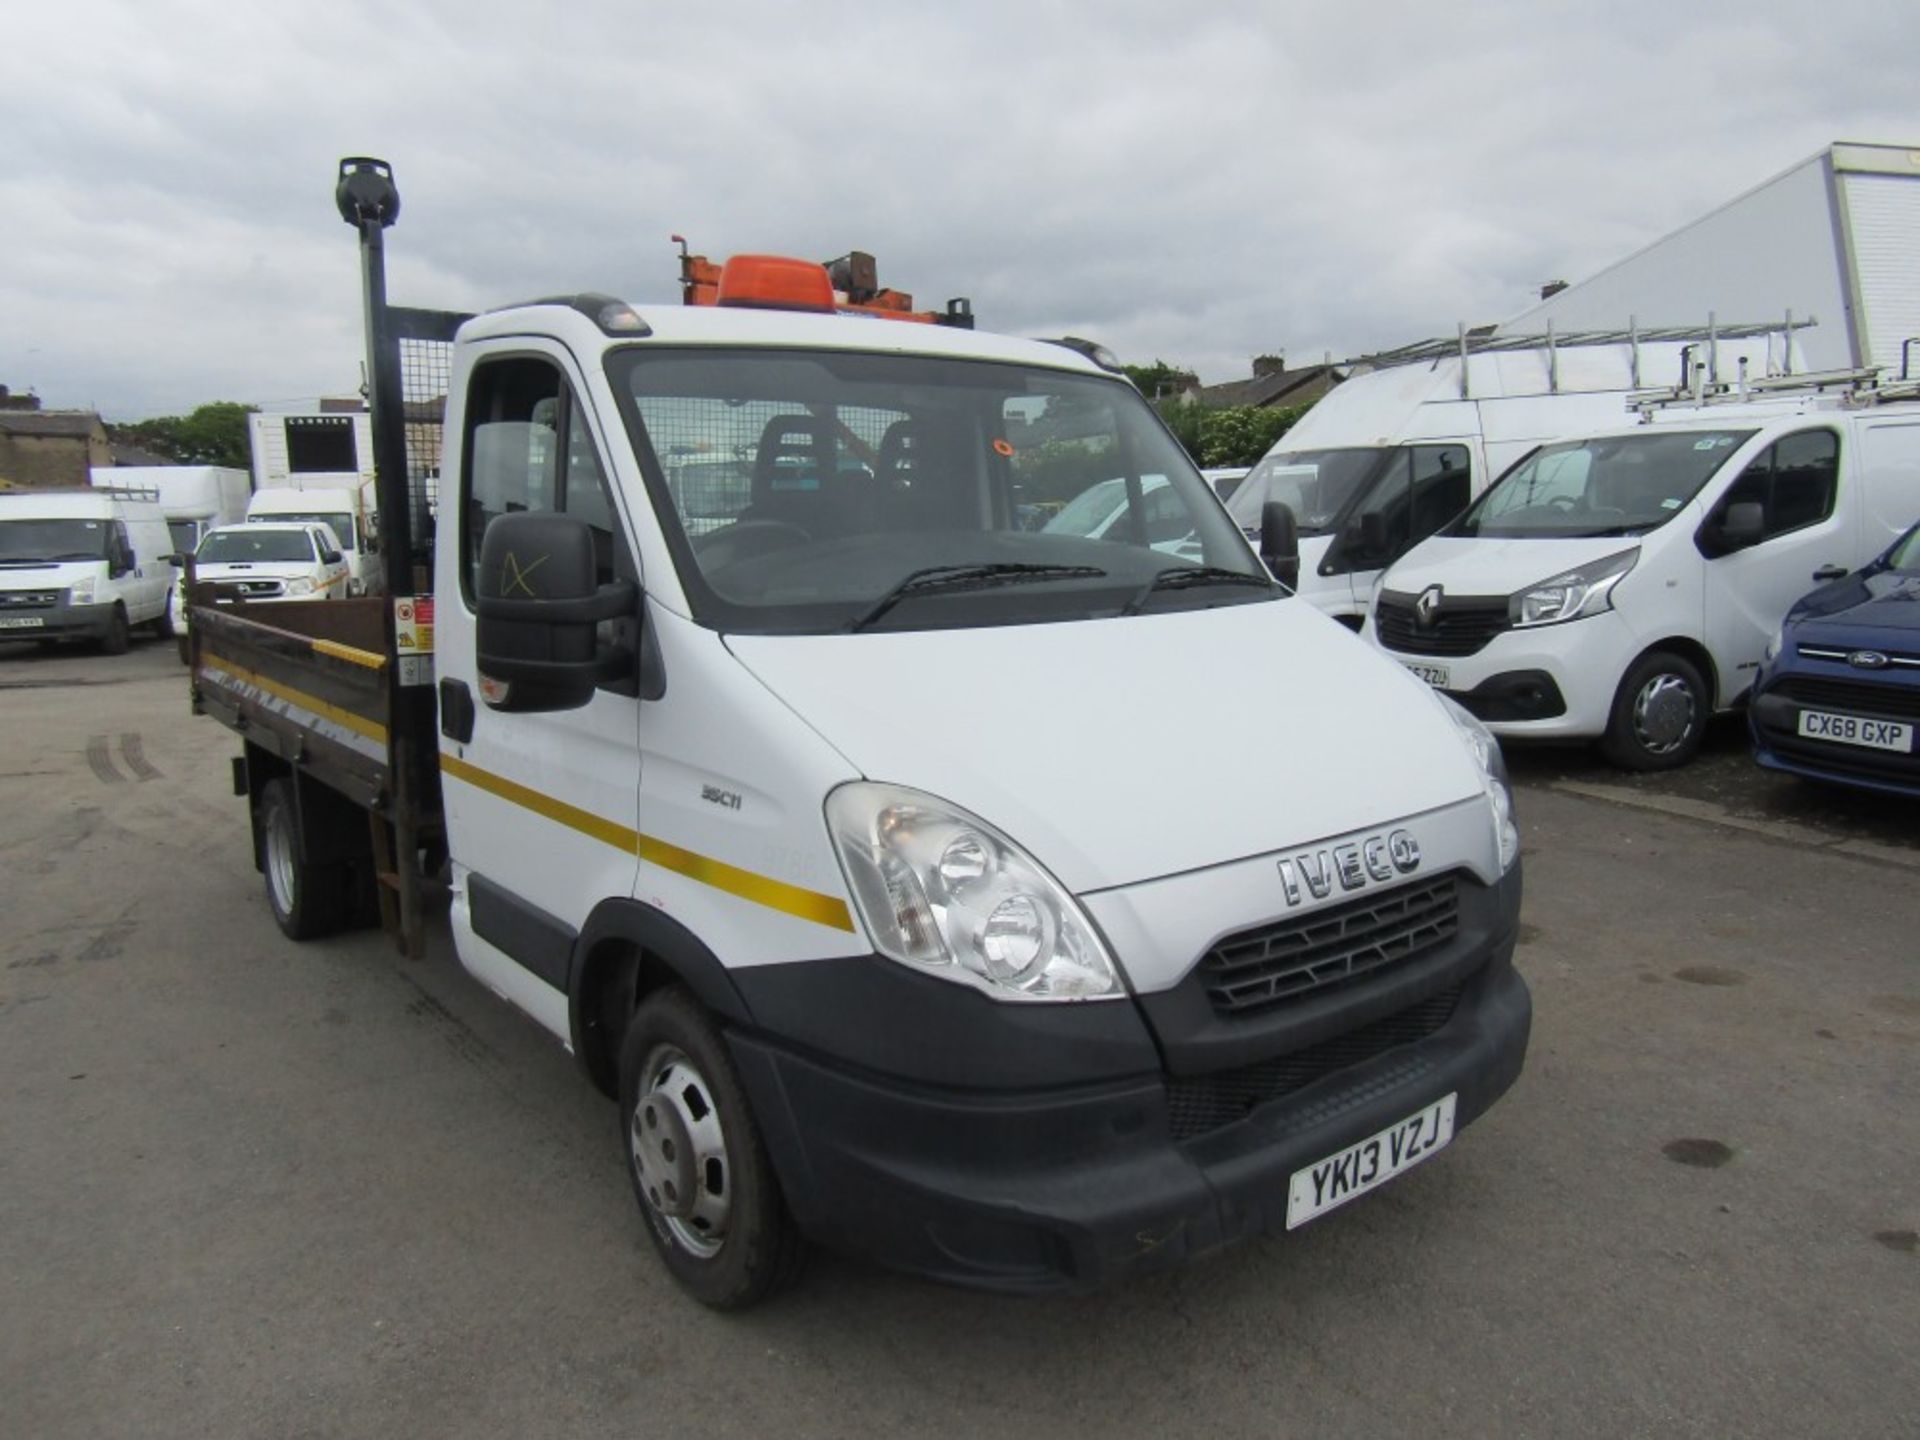 13 reg IVECO DAILY 35C11 TIPPER, 1ST REG 03/13, TEST 02/23, MILEAGE UNKNOWN, V5 HERE, 1 OWNER FROM